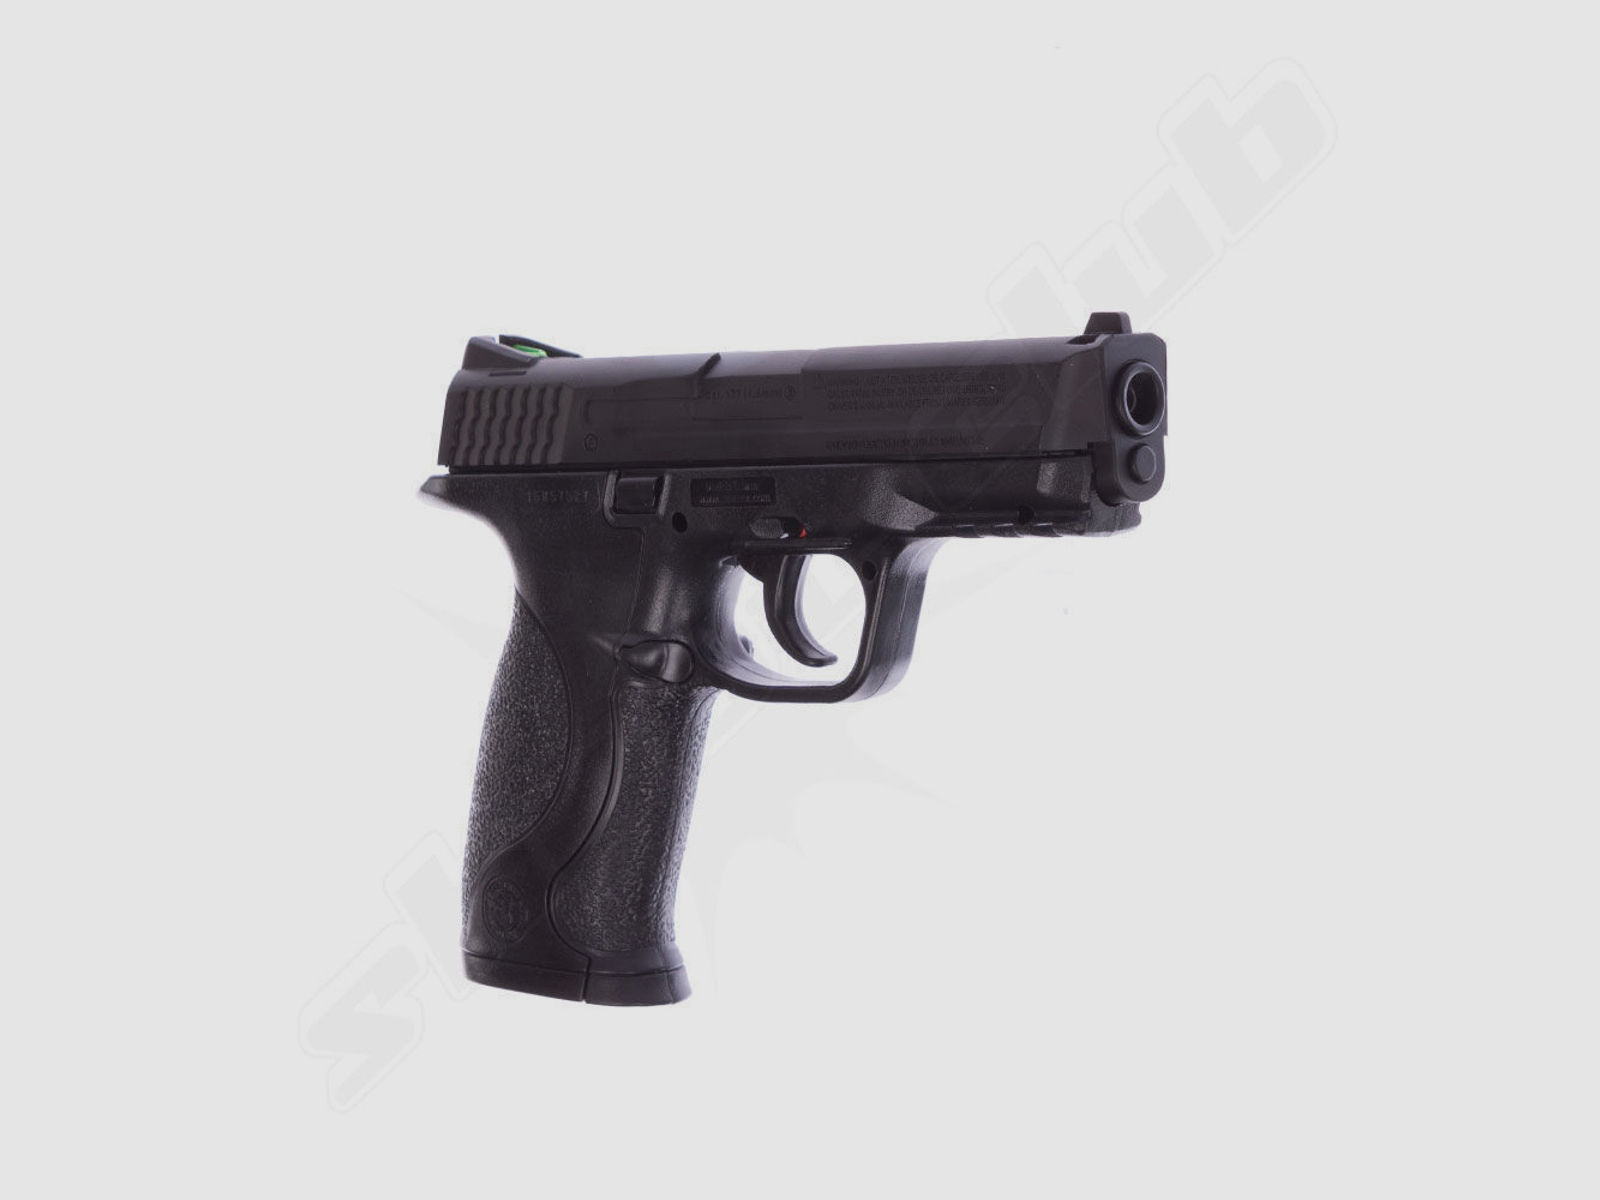 Smith & Wesson M&P 40 4,5 mm CO2 Pistole - Koffer-Set